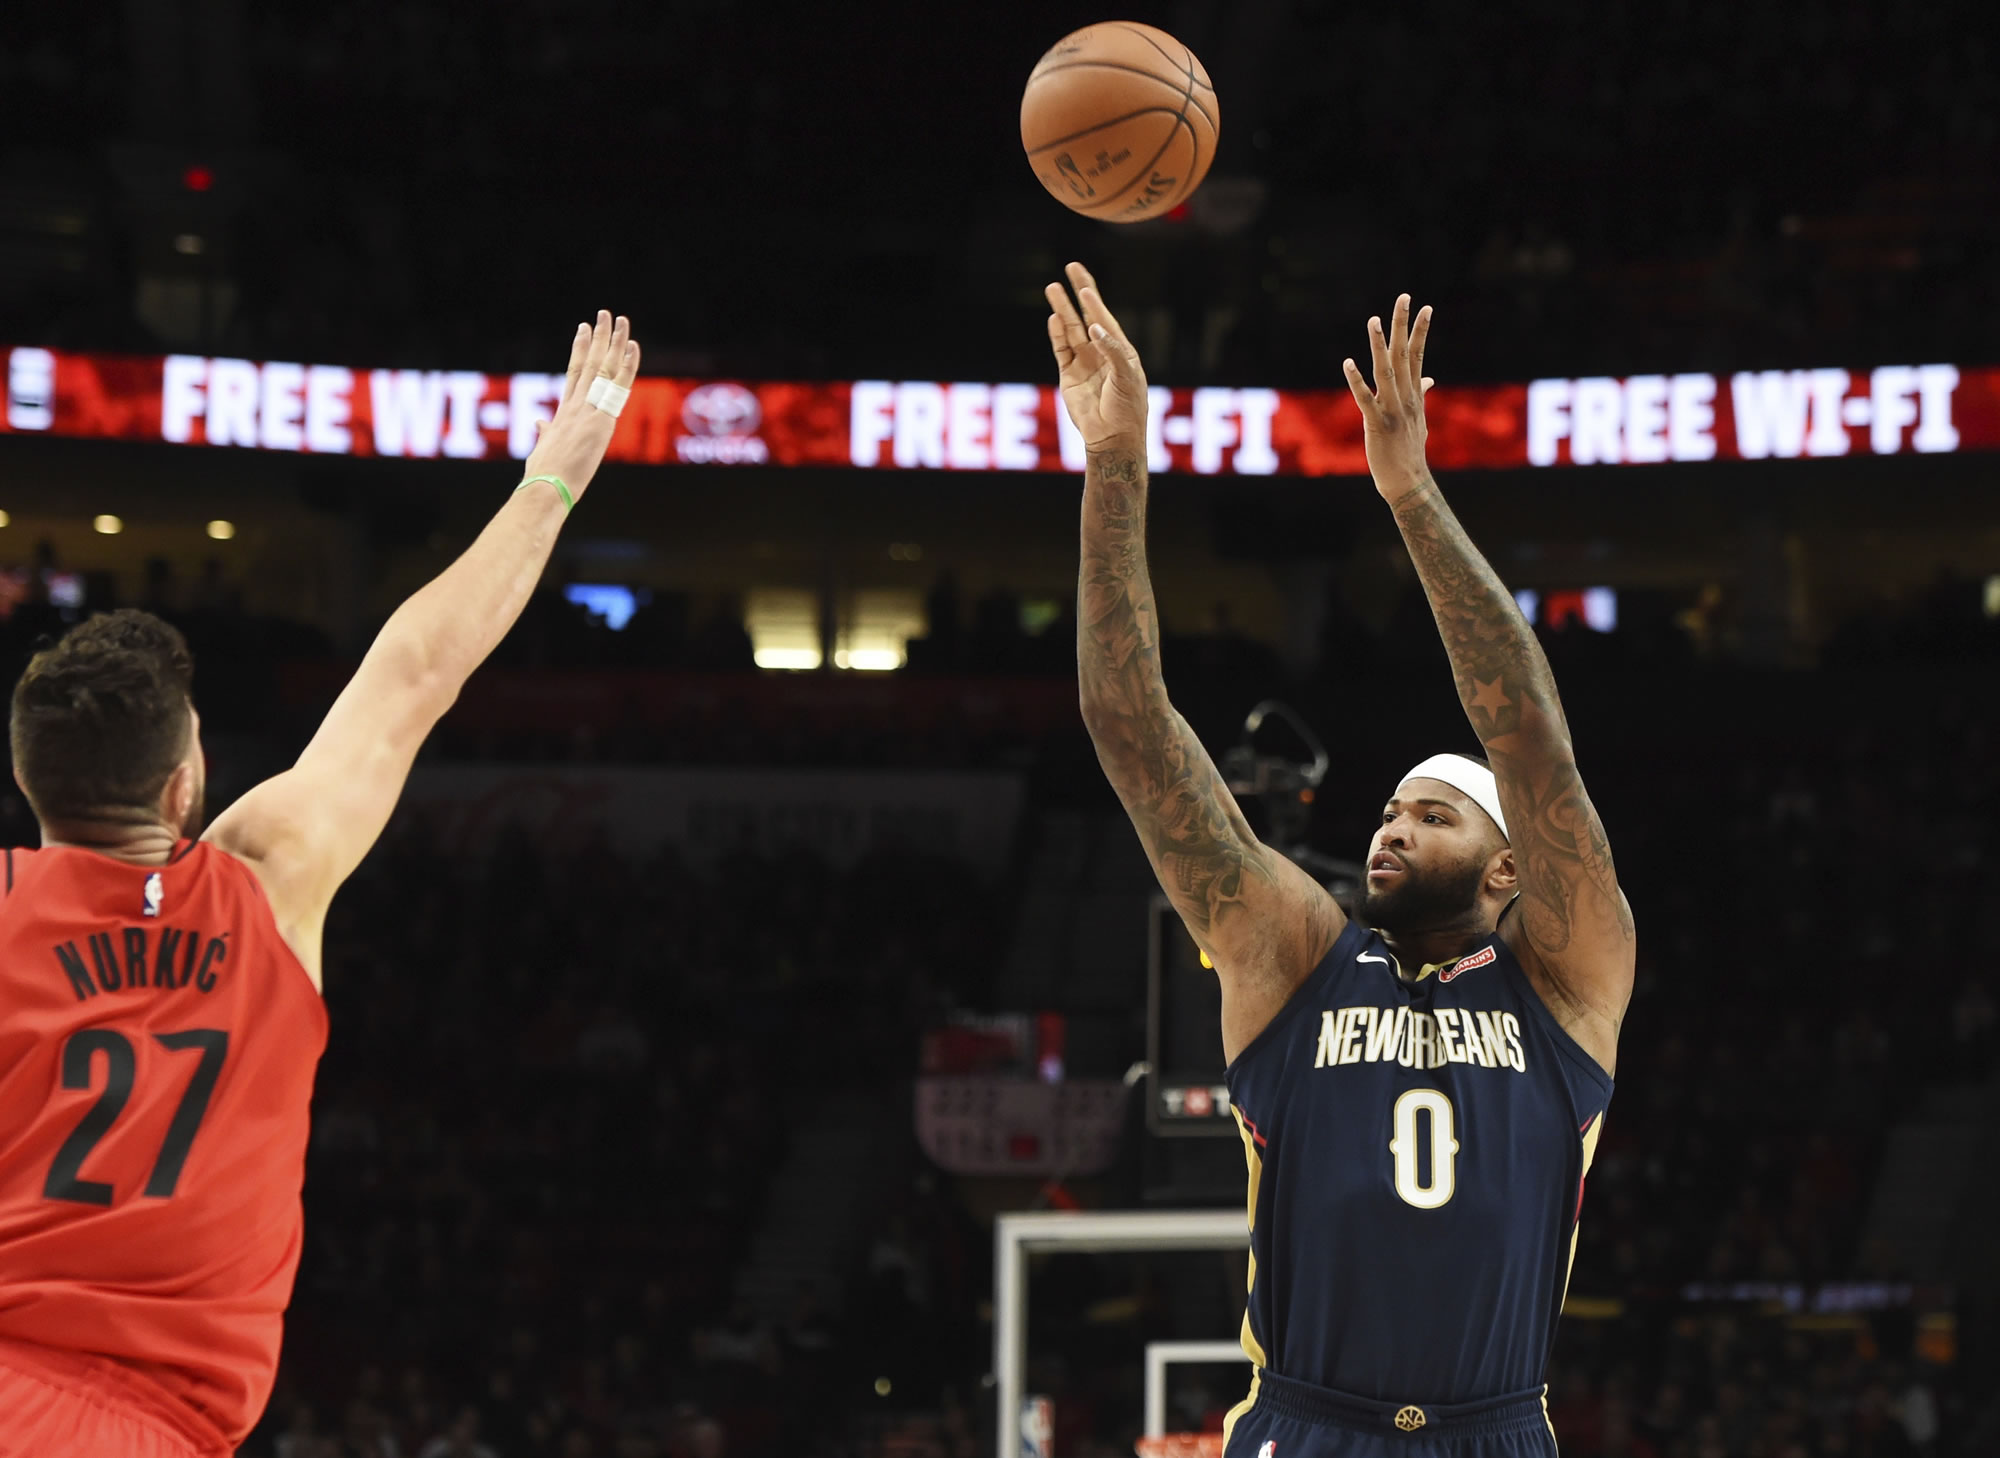 New Orleans Pelicans center DeMarcus Cousins shoots over Portland Trail Blazers center Jusuf Nurkic during the first half of an NBA basketball game in Portland, Ore., Saturday, Dec. 2, 2017.